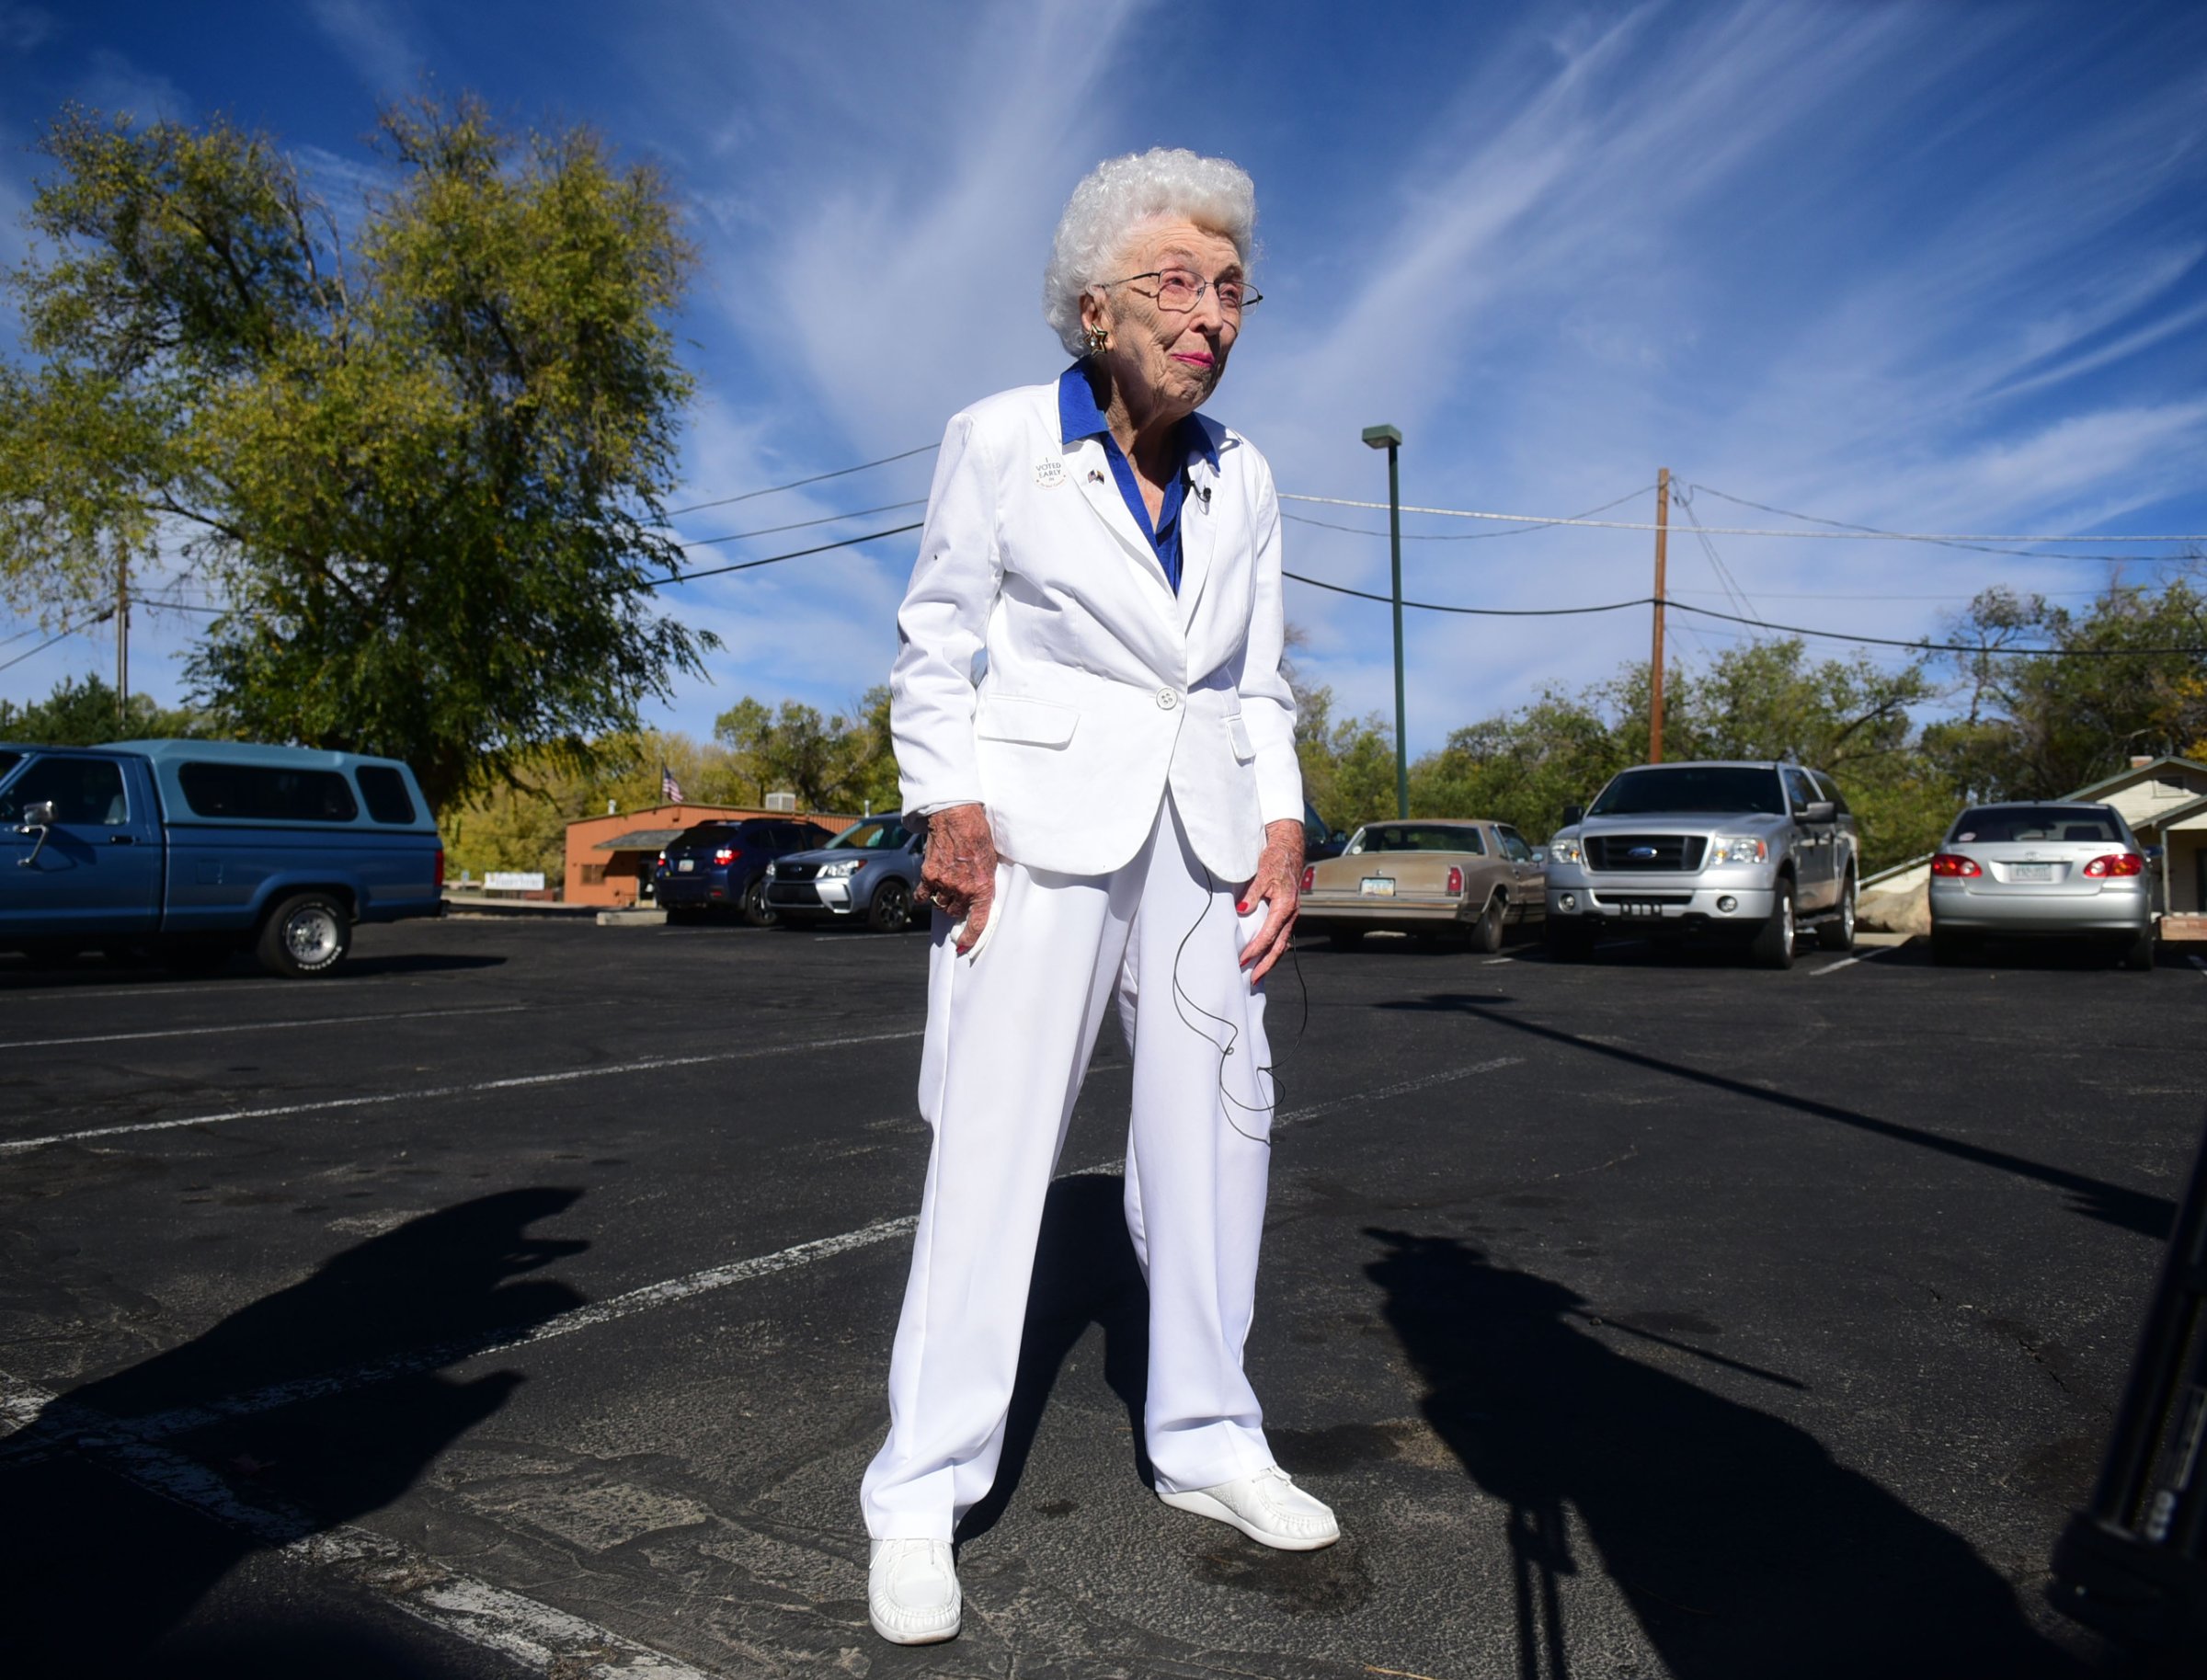 Jerry Emmett talks to reporters at the Yavapai County Administration Building after casting her early ballot in the 2016 presidential election in Prescott, Ariz., on Nov. 1, 2016. Emmett, who is 102 years old, voted for Franklin Delano Roosevelt in her first Presidential election. "I am getting to vote for Hillary Clinton for president which has been my dream since Bill Clinton was President." Emmett said.